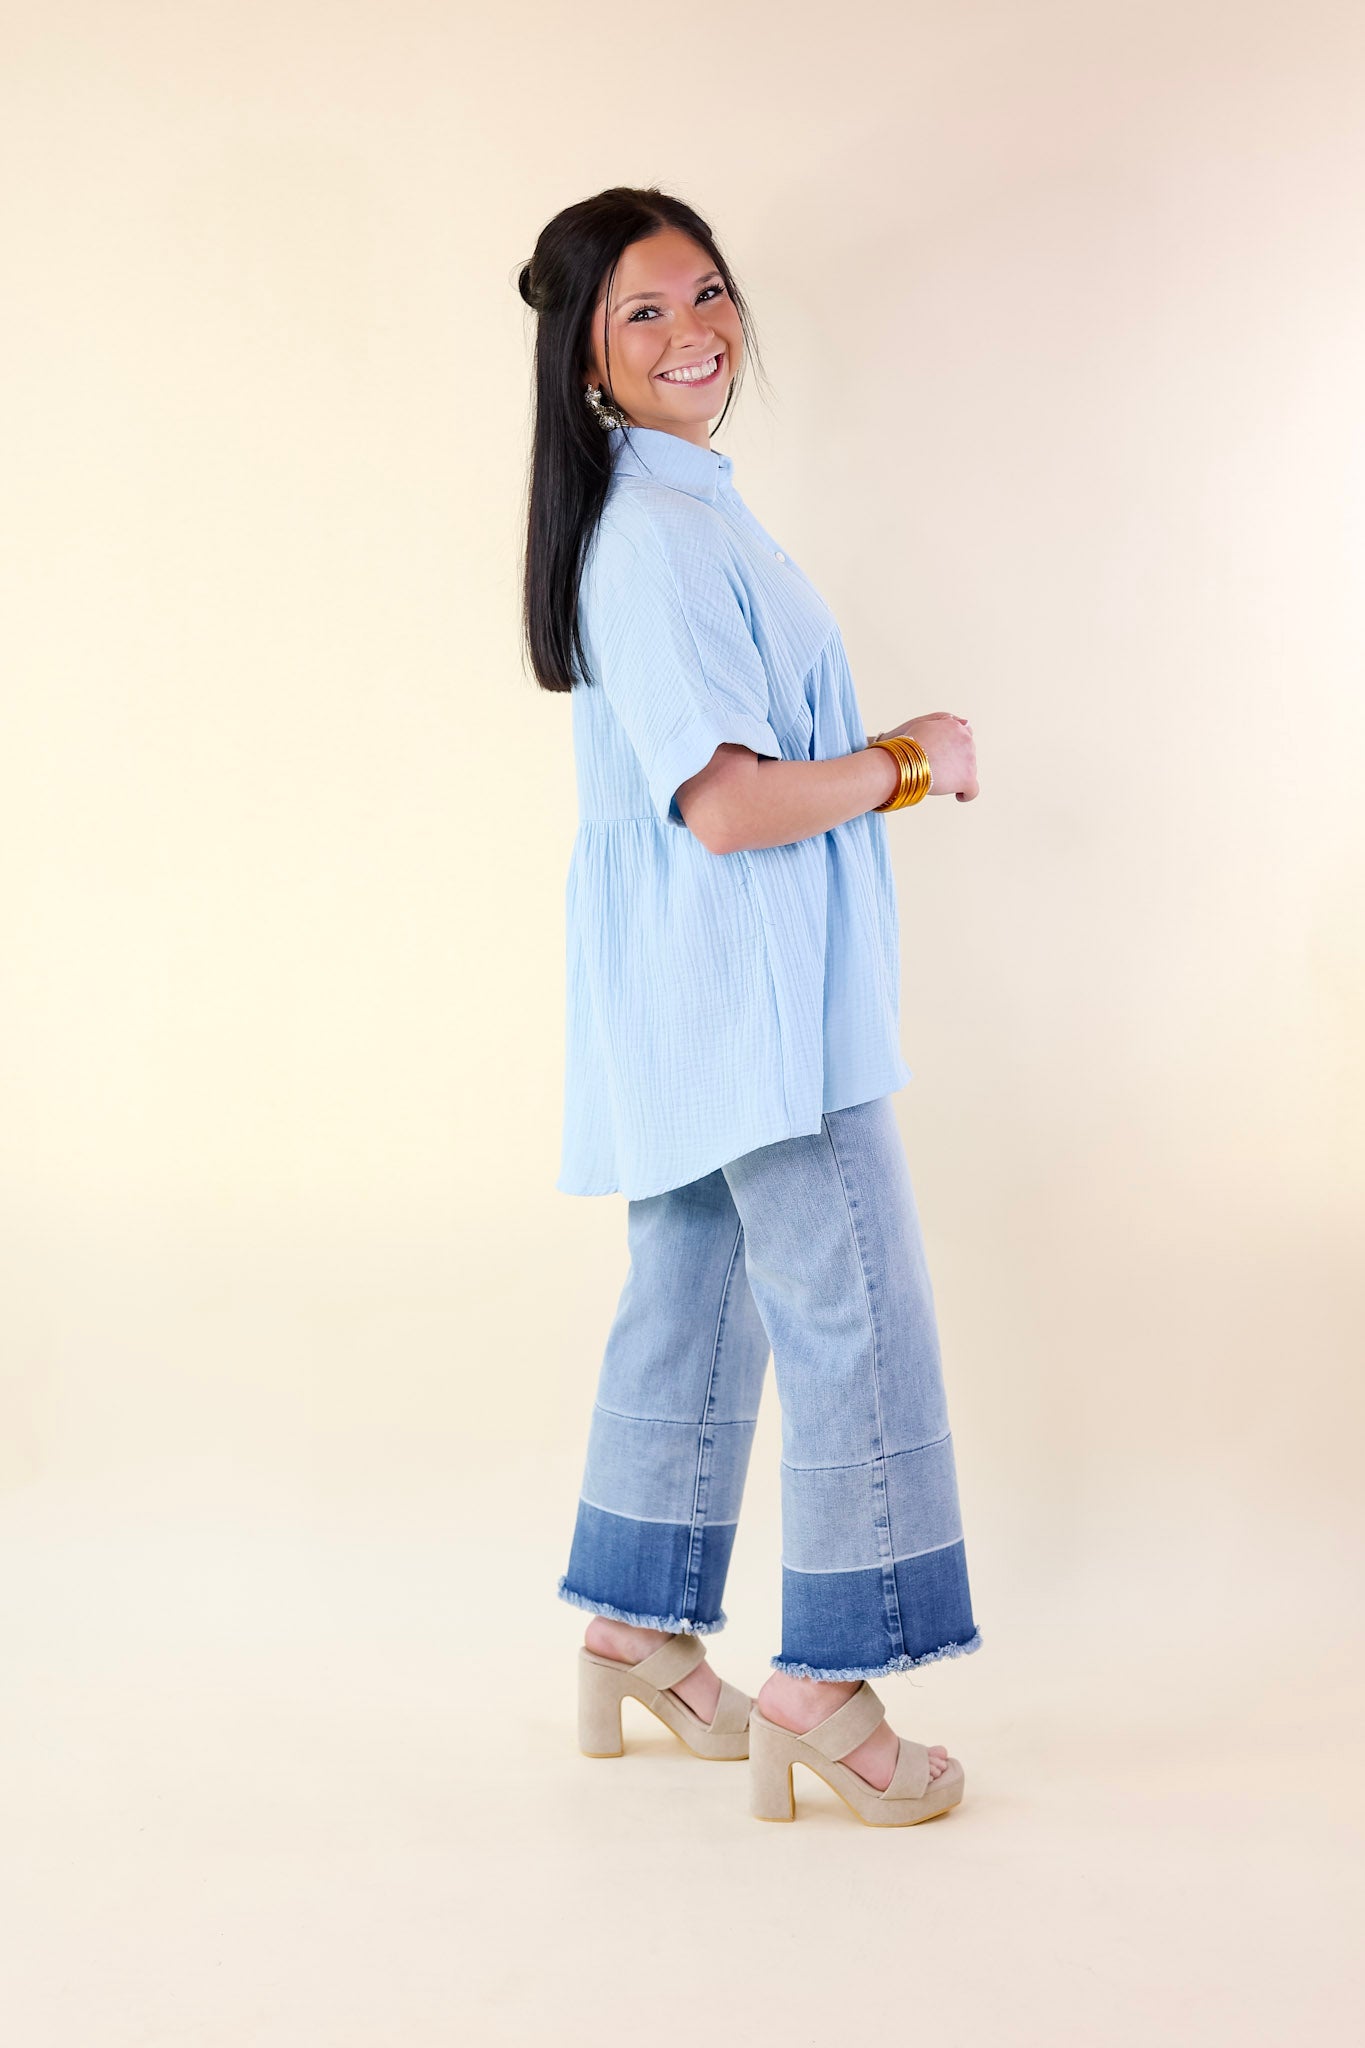 Vacation Vibes Collared Button Up Babydoll Top in Airy Blue - Giddy Up Glamour Boutique